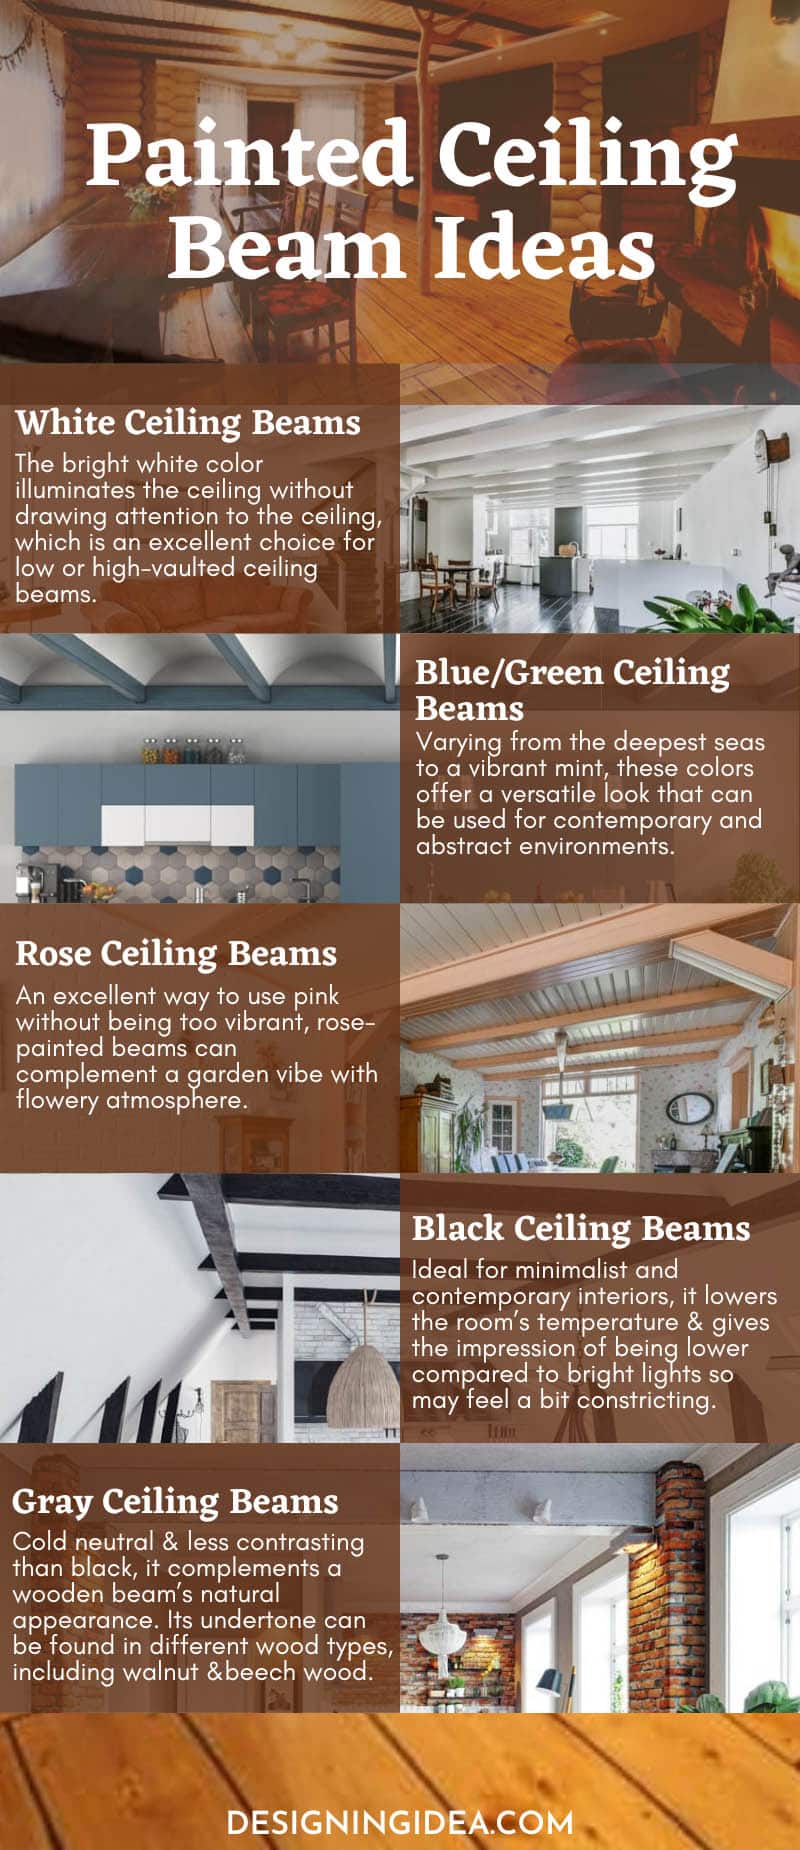 Painted ceiling beam ideas infographic